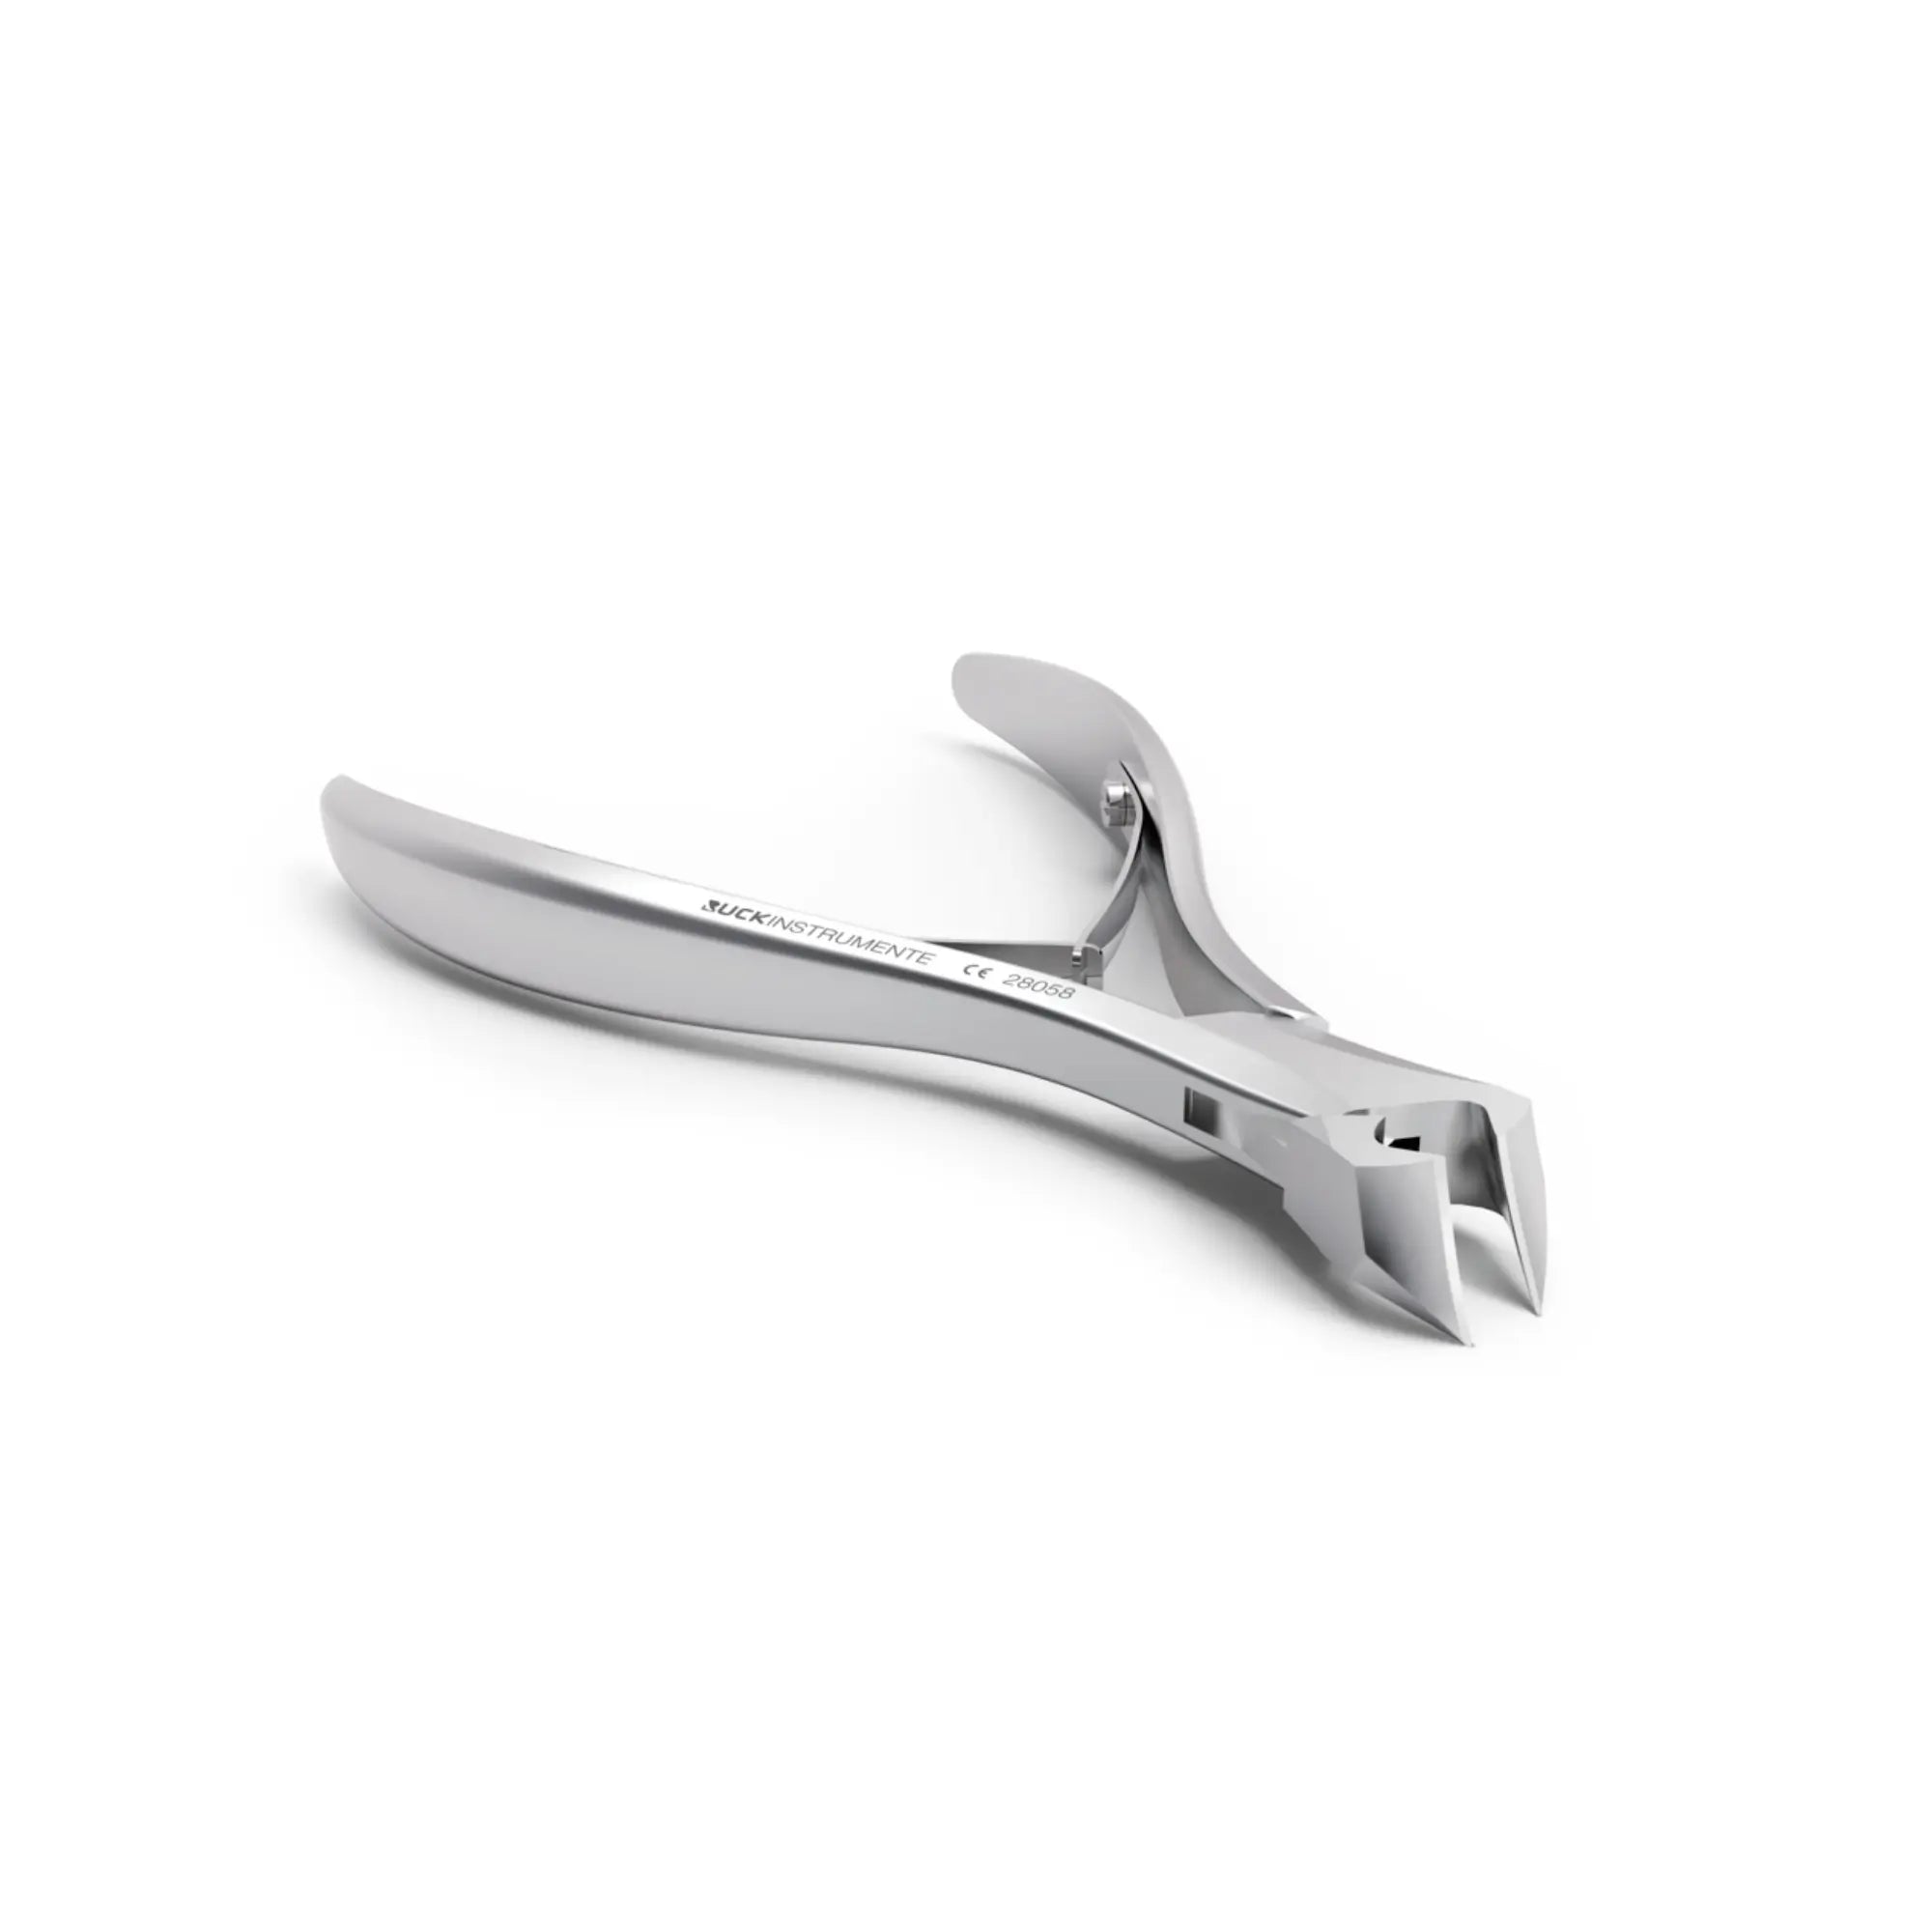 Pince à ongles - Coupe droite 12 mm - 11 cm - Ruck Ruck